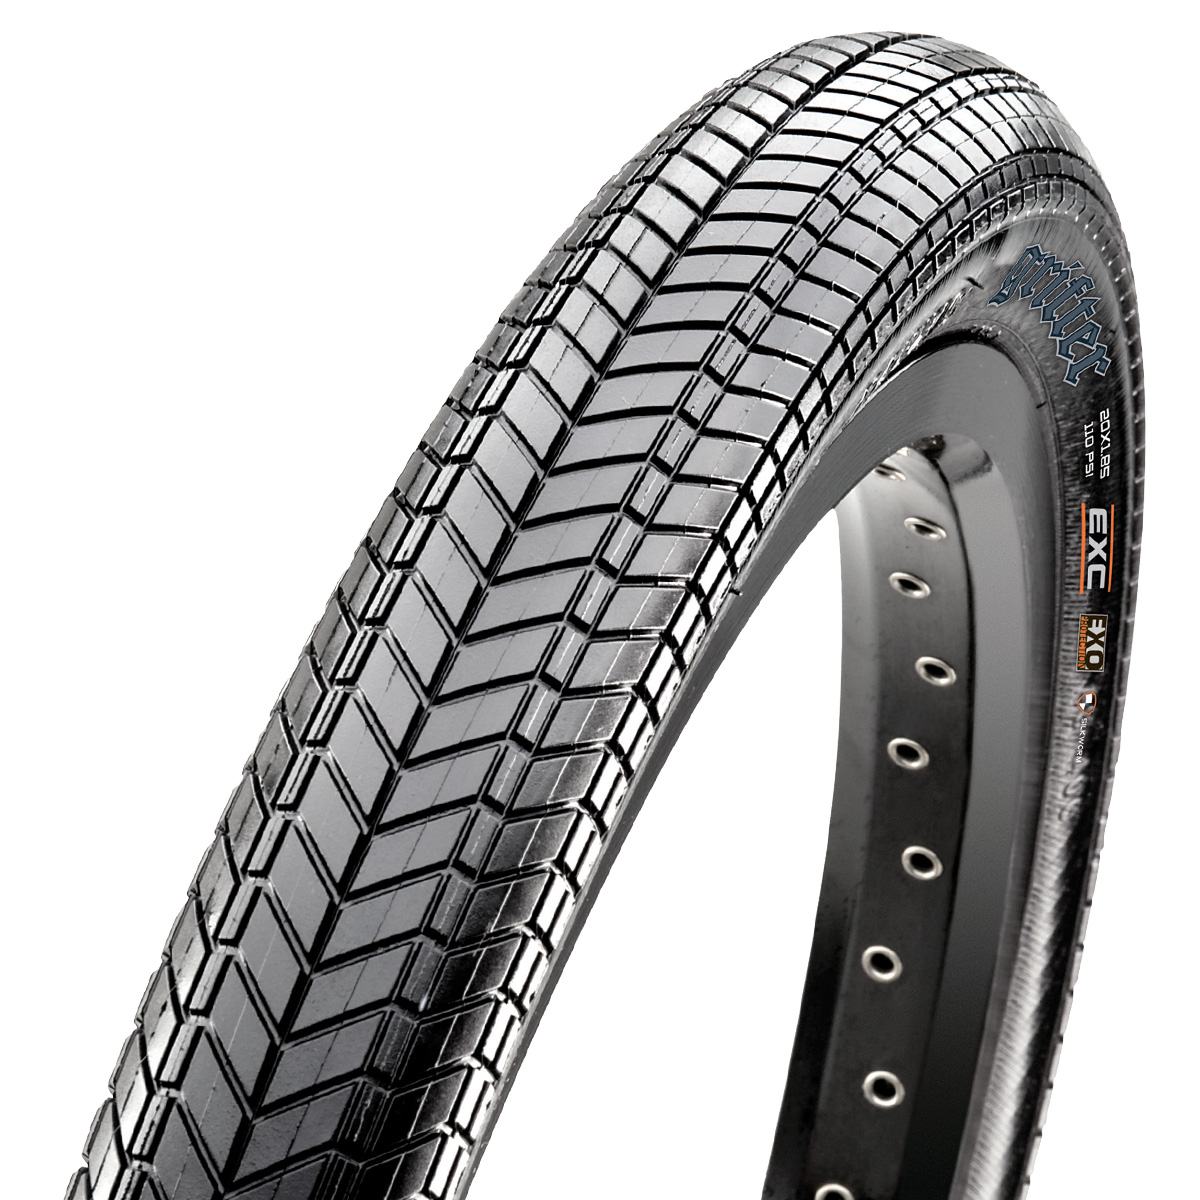 Покришка складна Maxxis 20x2.40 Grifter, 60 TPI	